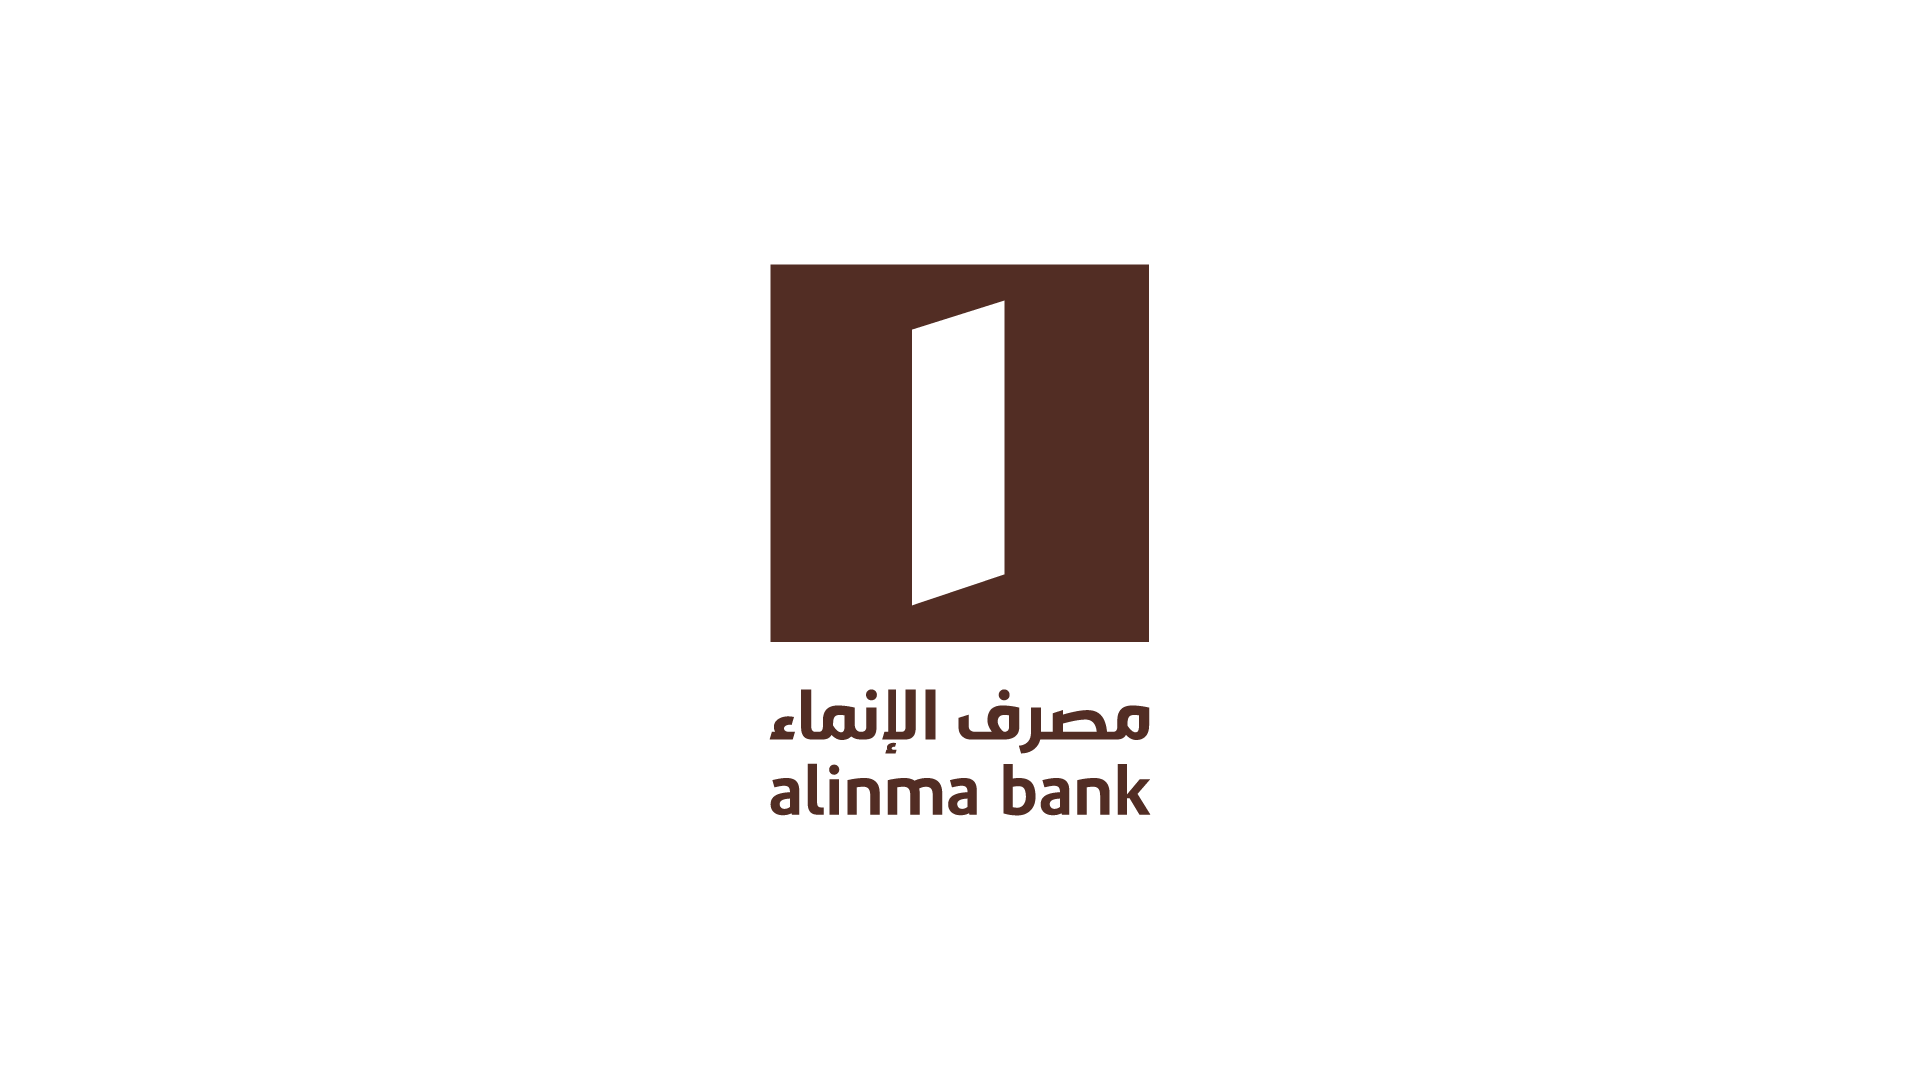 Alinma Bank Launches its Sustainability and Social Responsibility Program AMAD